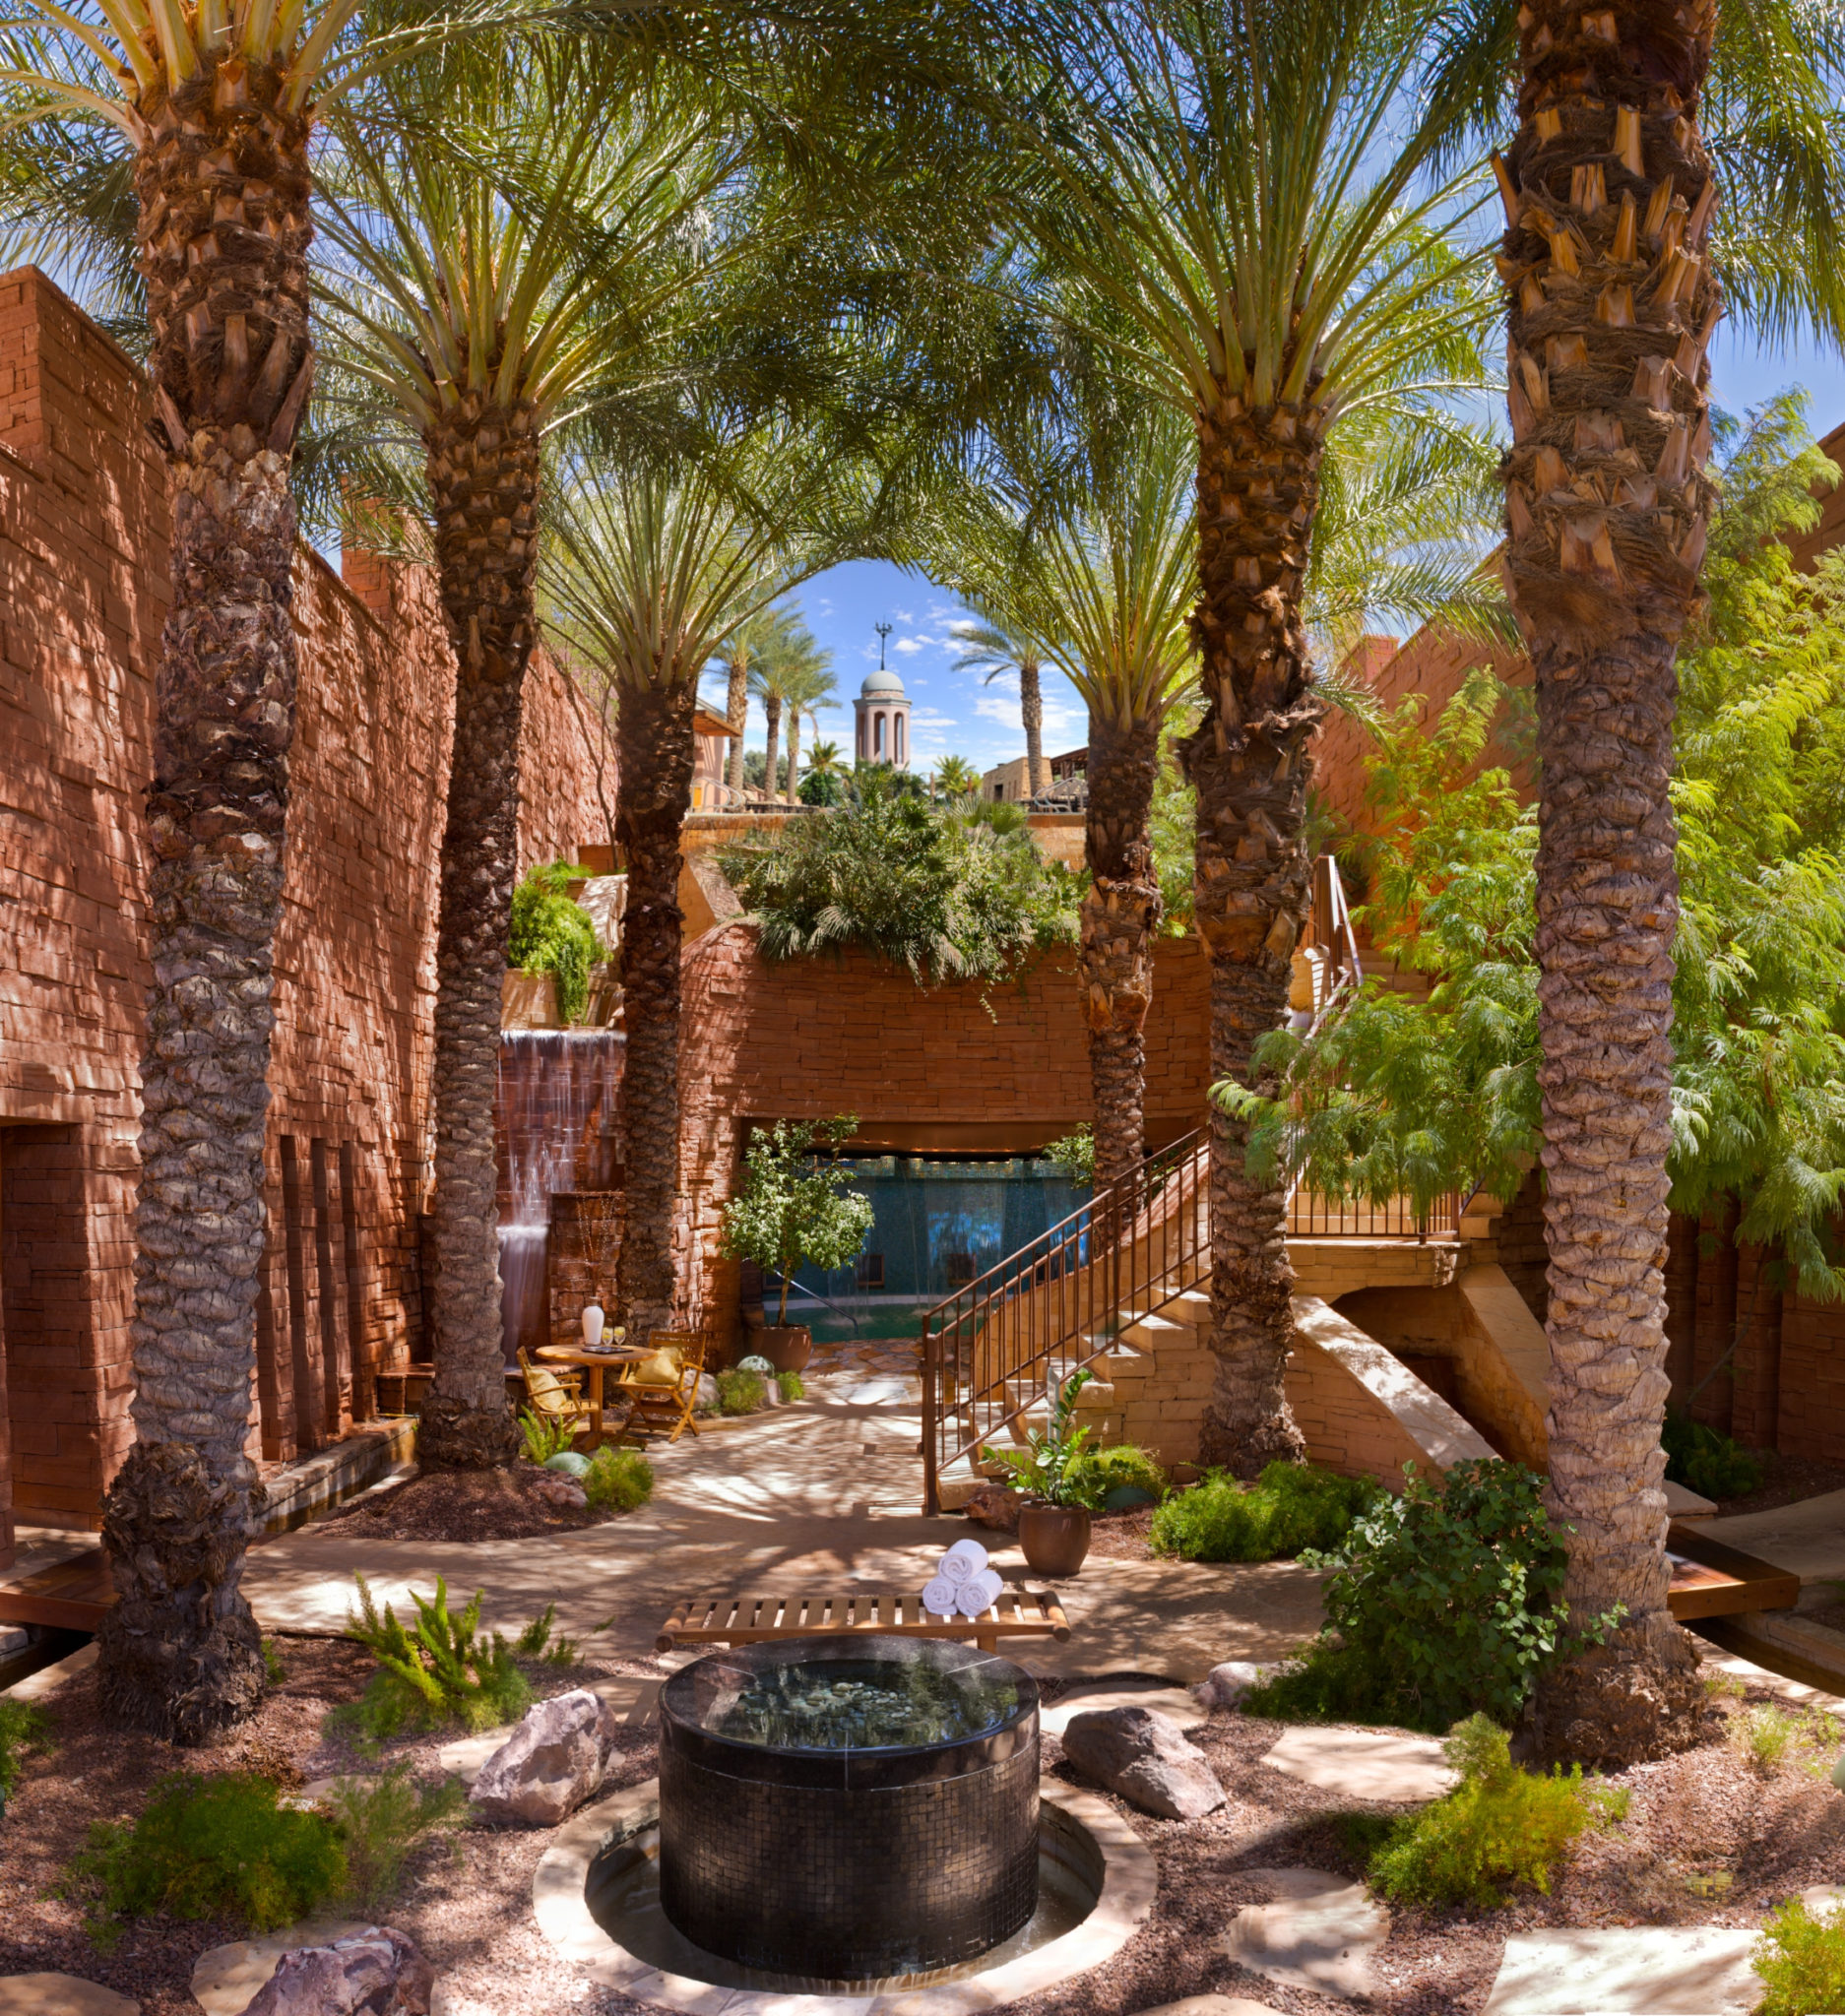 Well & Being Spa at Fairmont Princess Scottsdale